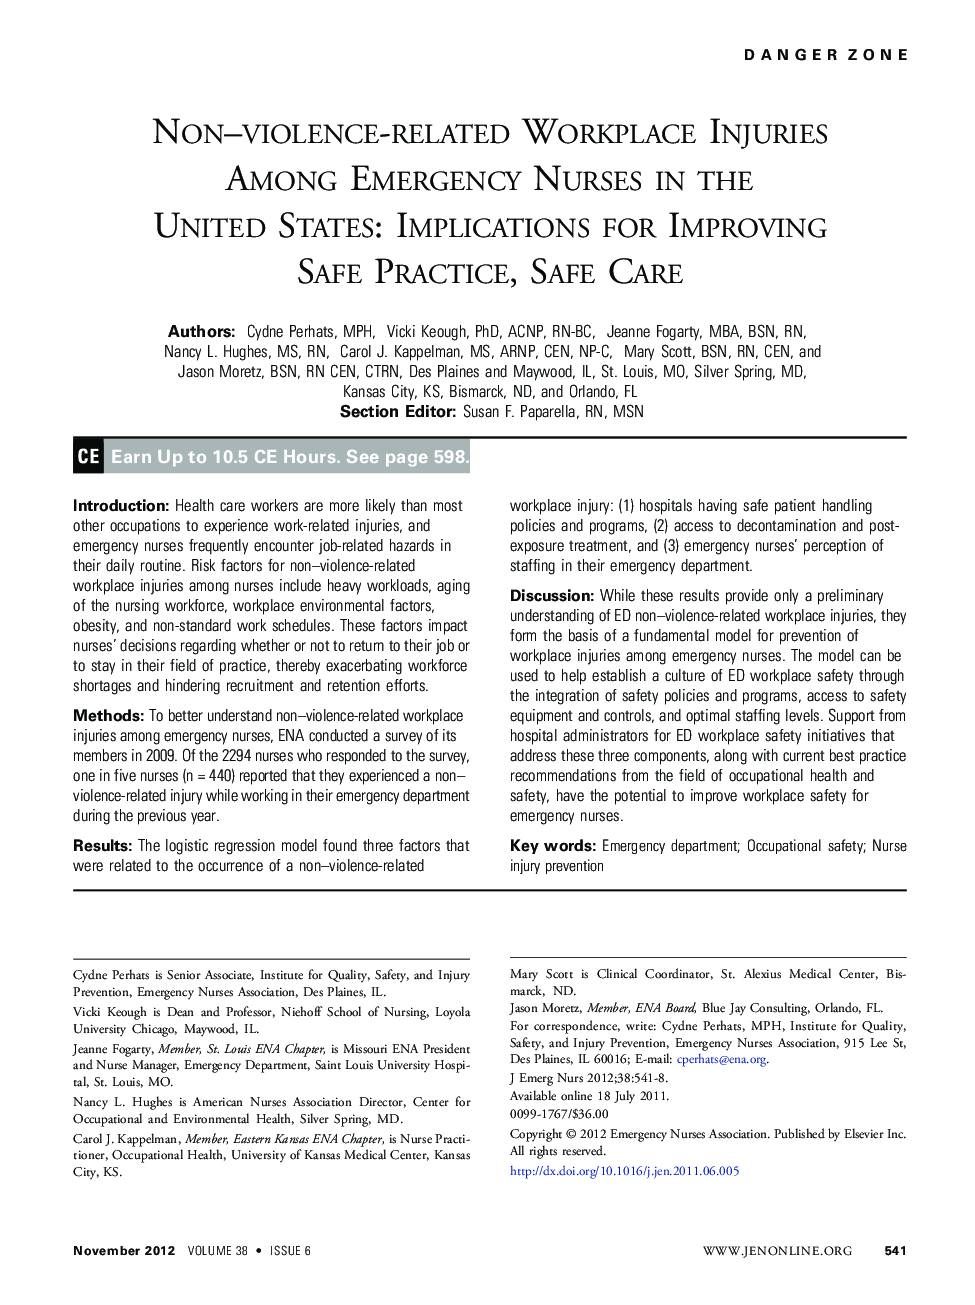 Non–violence-related Workplace Injuries Among Emergency Nurses in the United States: Implications for Improving Safe Practice, Safe Care 